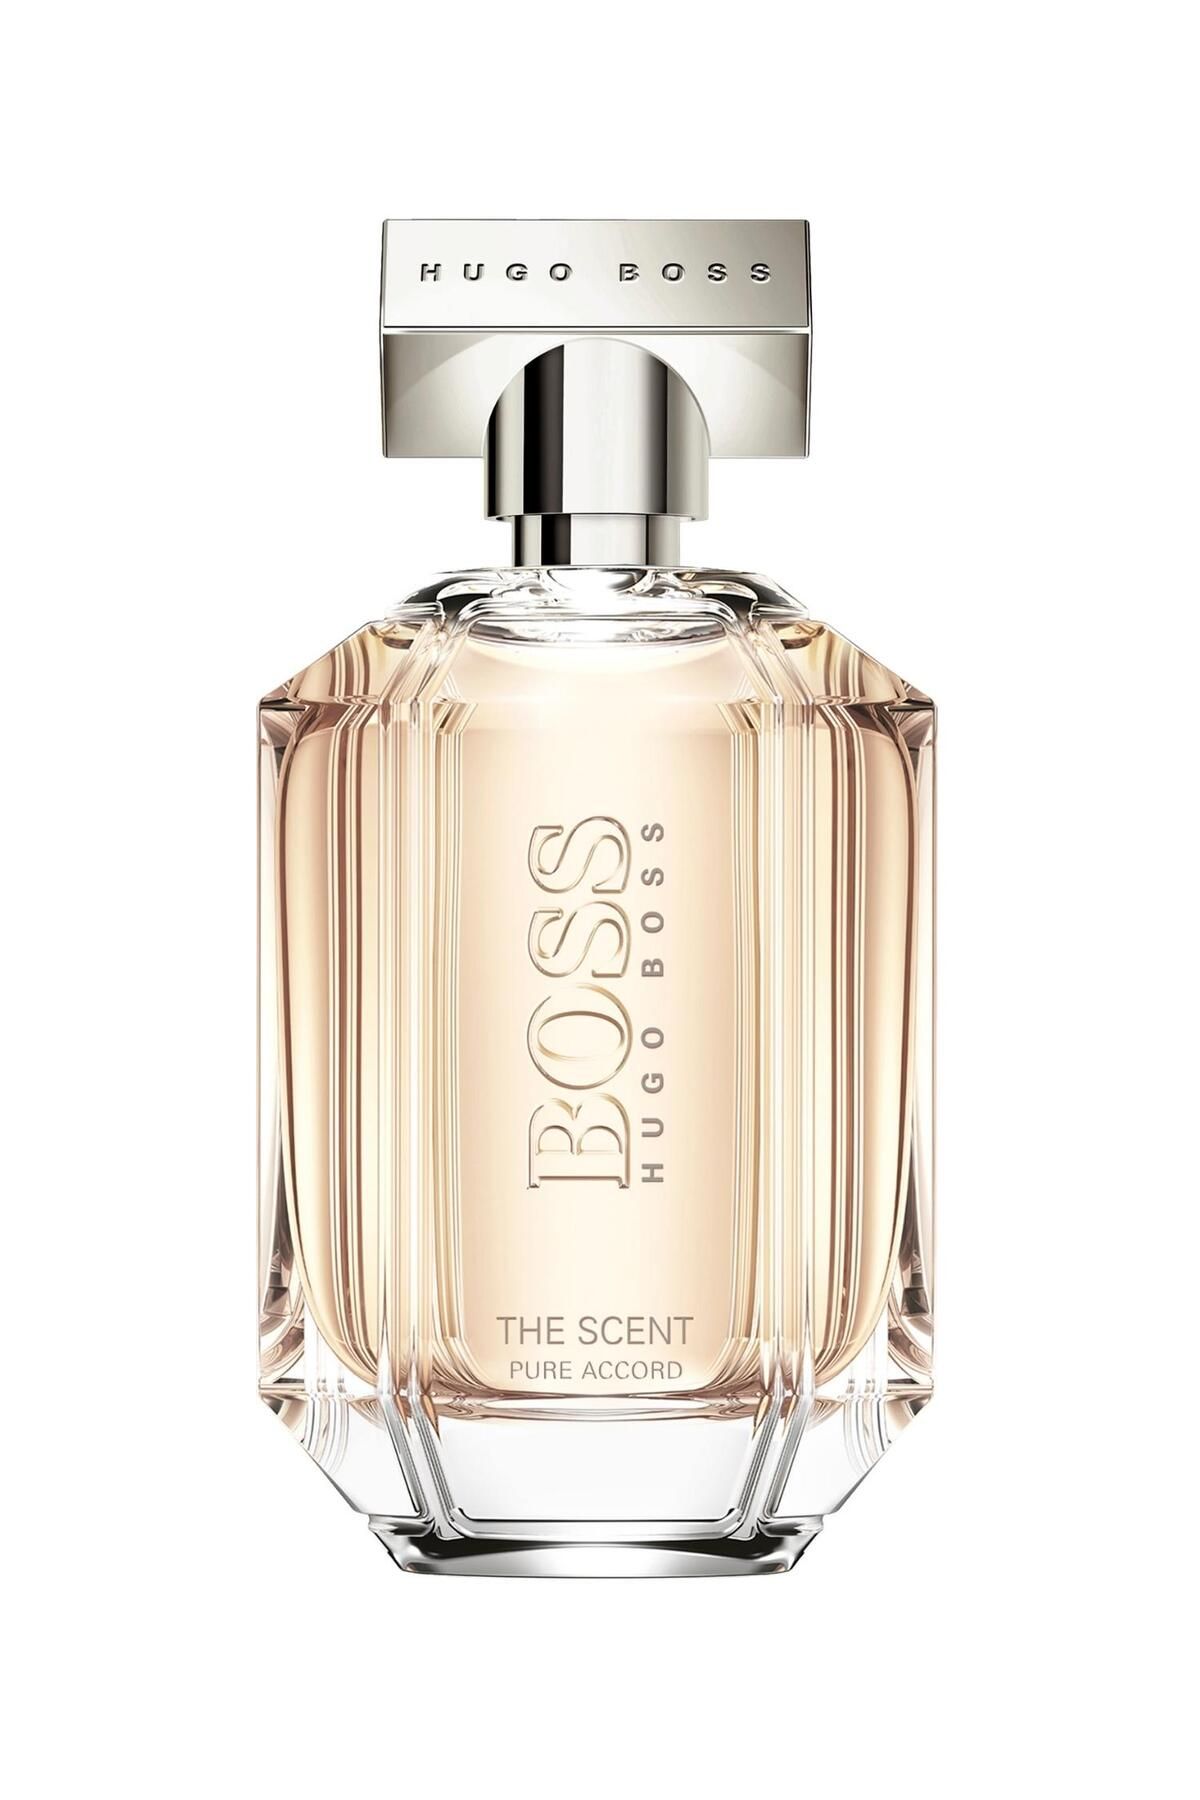 Hugo Boss the Scent for her (100 мл.). Hugo Boss the Scent for him 100мл. Парфюм Хьюго босс женские.